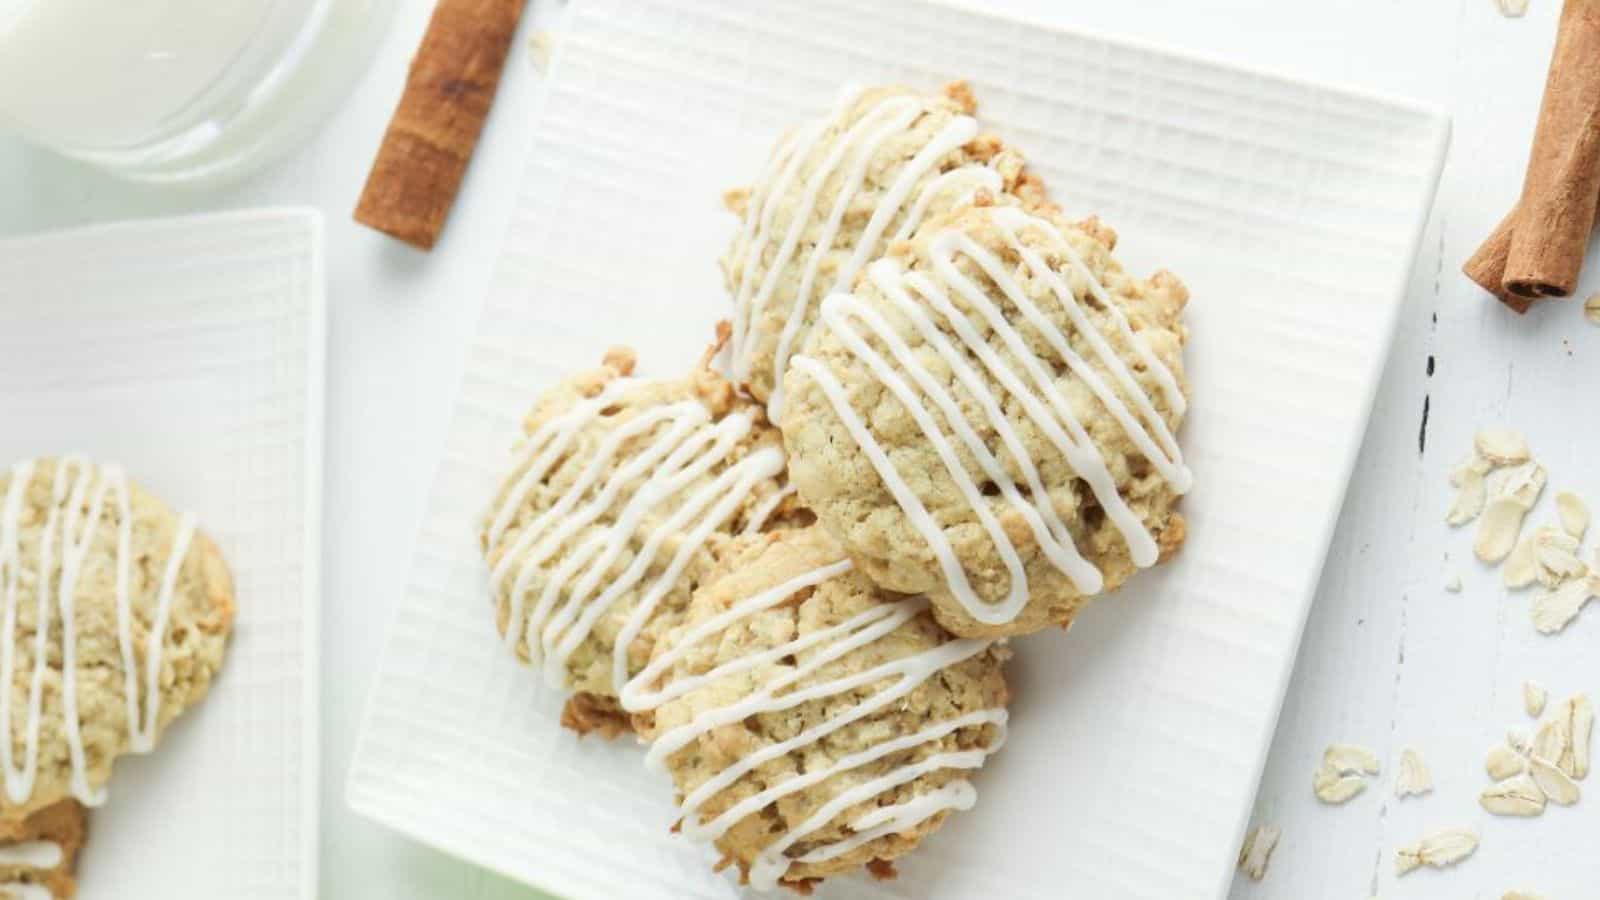 Apple oatmeal cookies with icing and cinnamon on a white plate.